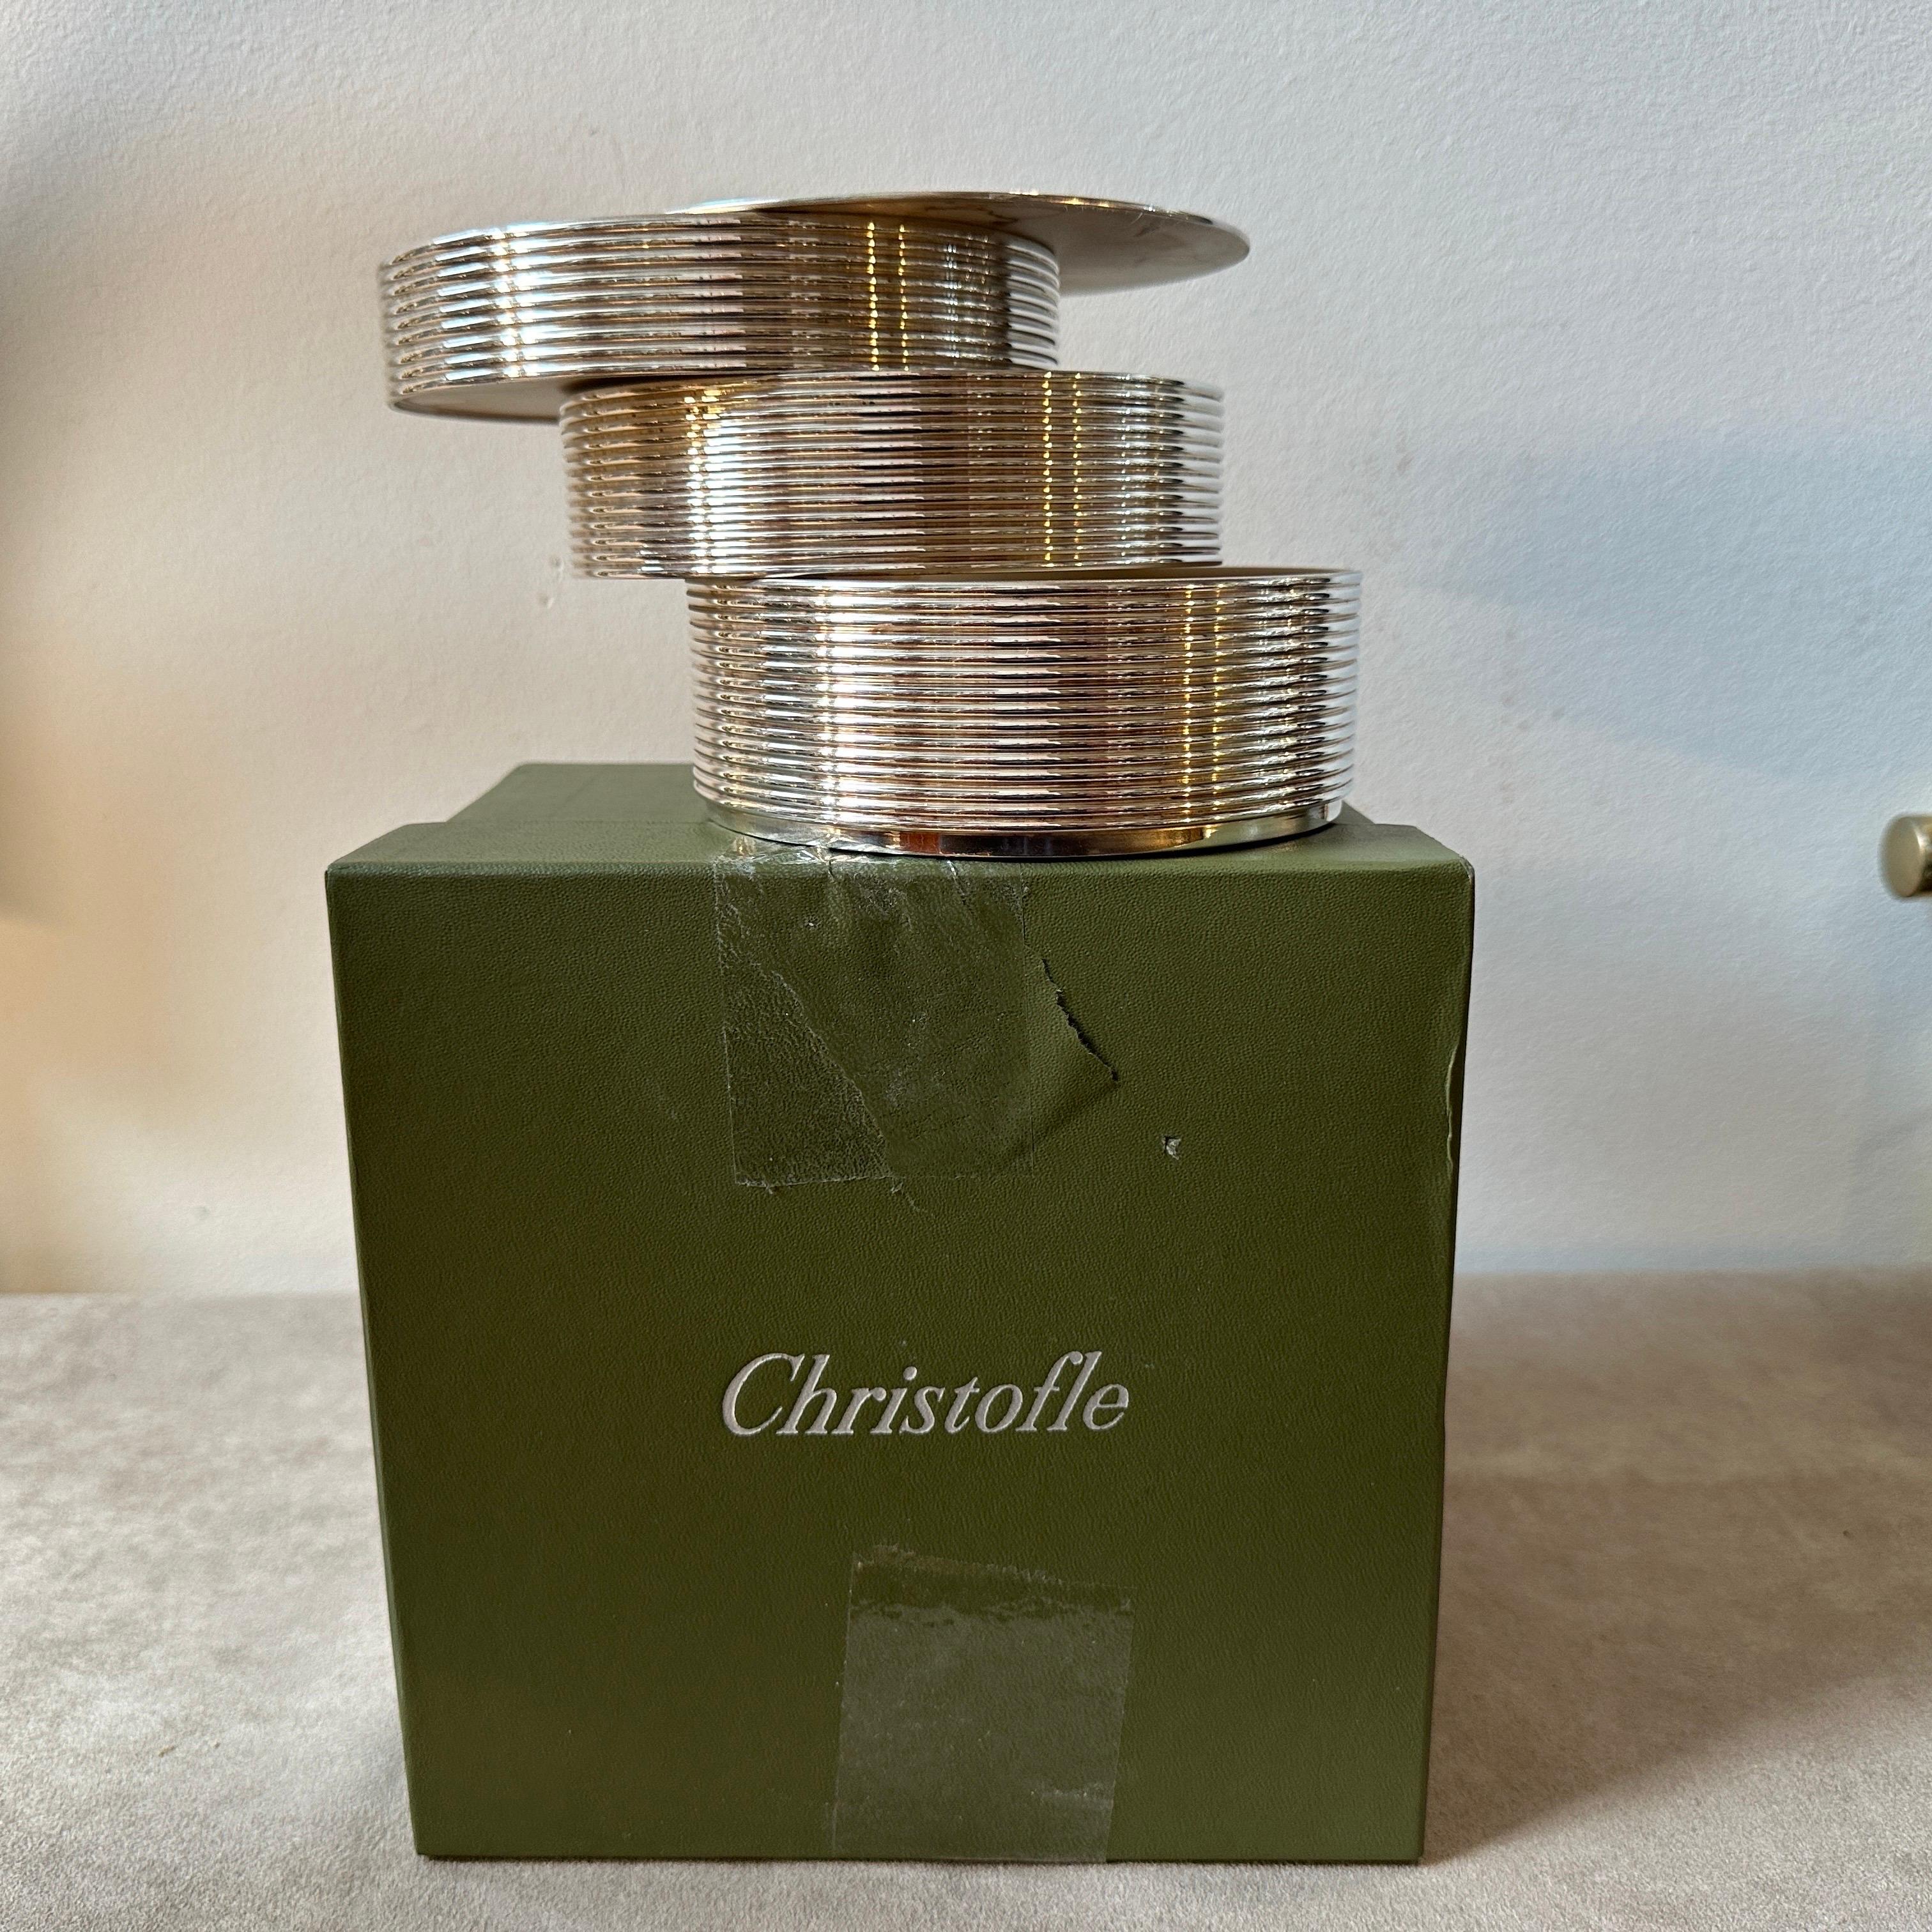 1990s Modern Design Silver Plated French Jewelry Box by Christofle For Sale 4